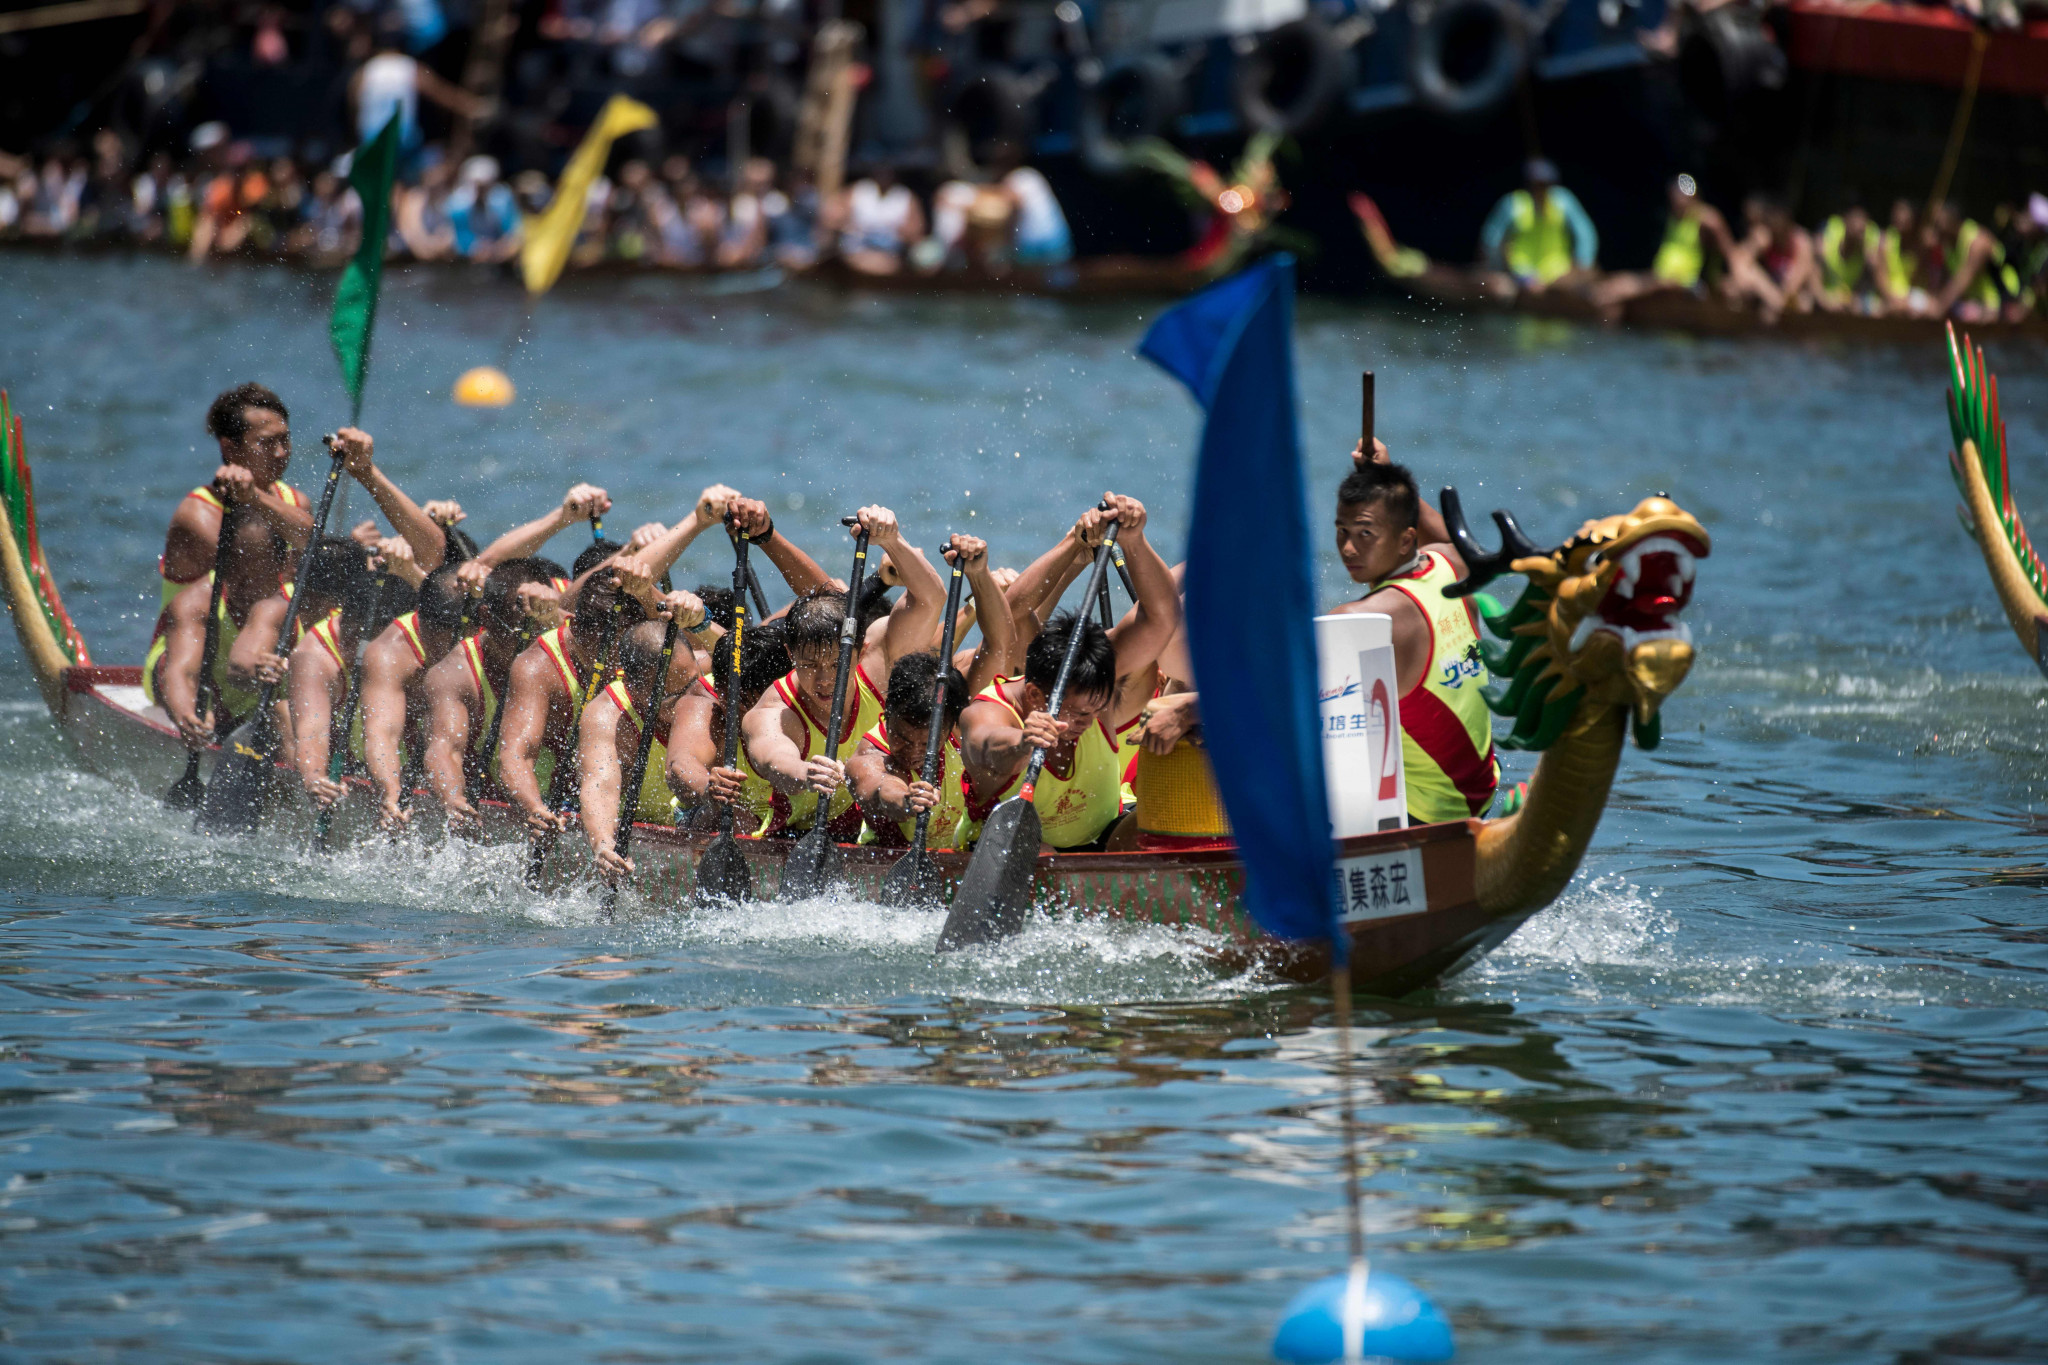 Competition will commence this week in the International Dragon Boat Federation World Championships ©Getty Images